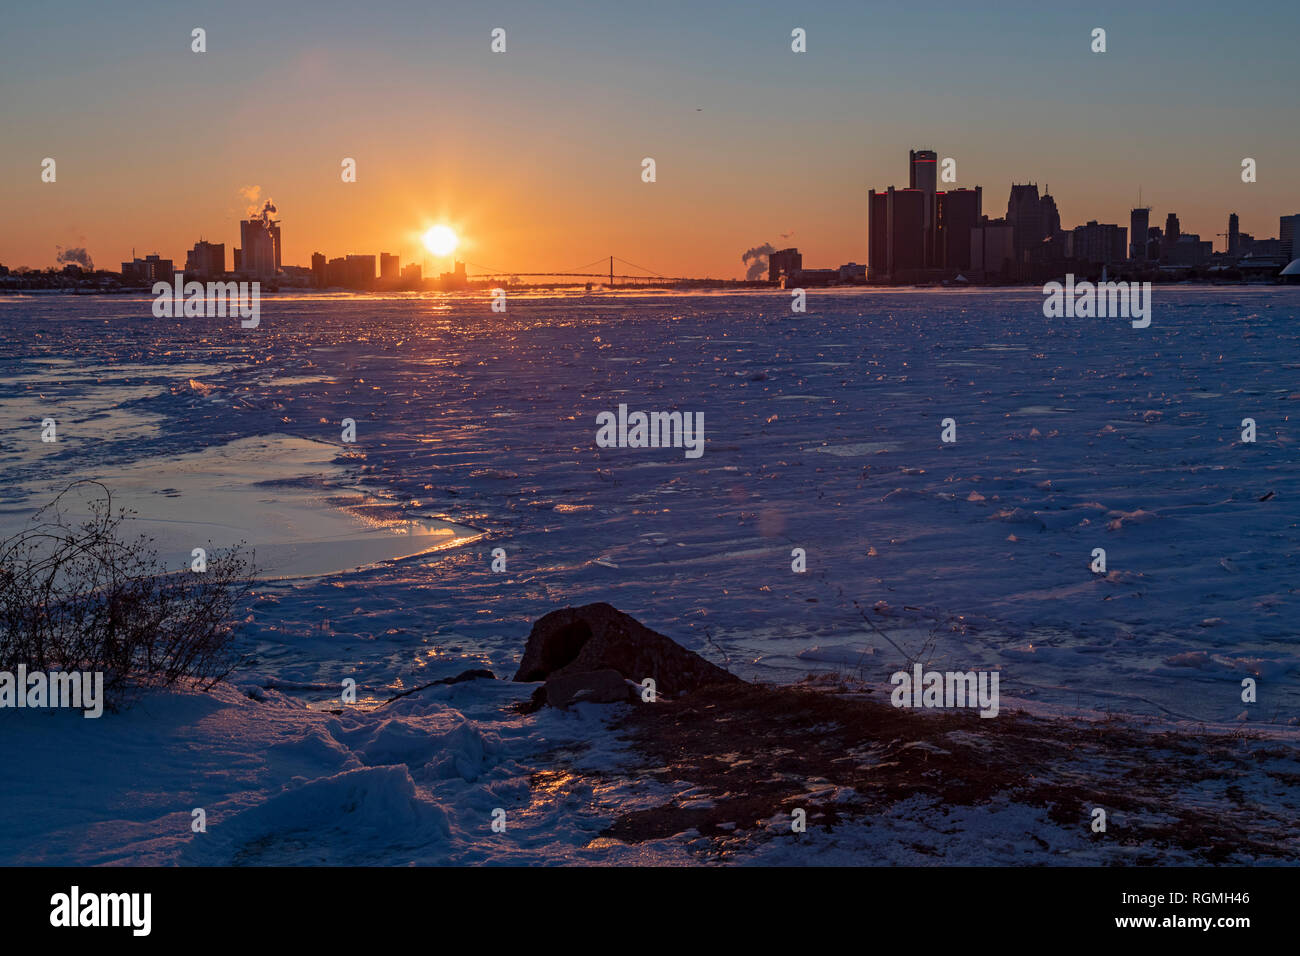 Detroit, Michigan USA - 30 January 2019 - As polar cold air swept the U.S. midwest, a low temperature record was broken in Detroit even before the sun set over the ice-choked Detroit River. At sunset, the temperature was -7F (-22C). The overnight low was expected to reach -16F (-27C). Credit: Jim West/Alamy Live News Stock Photo